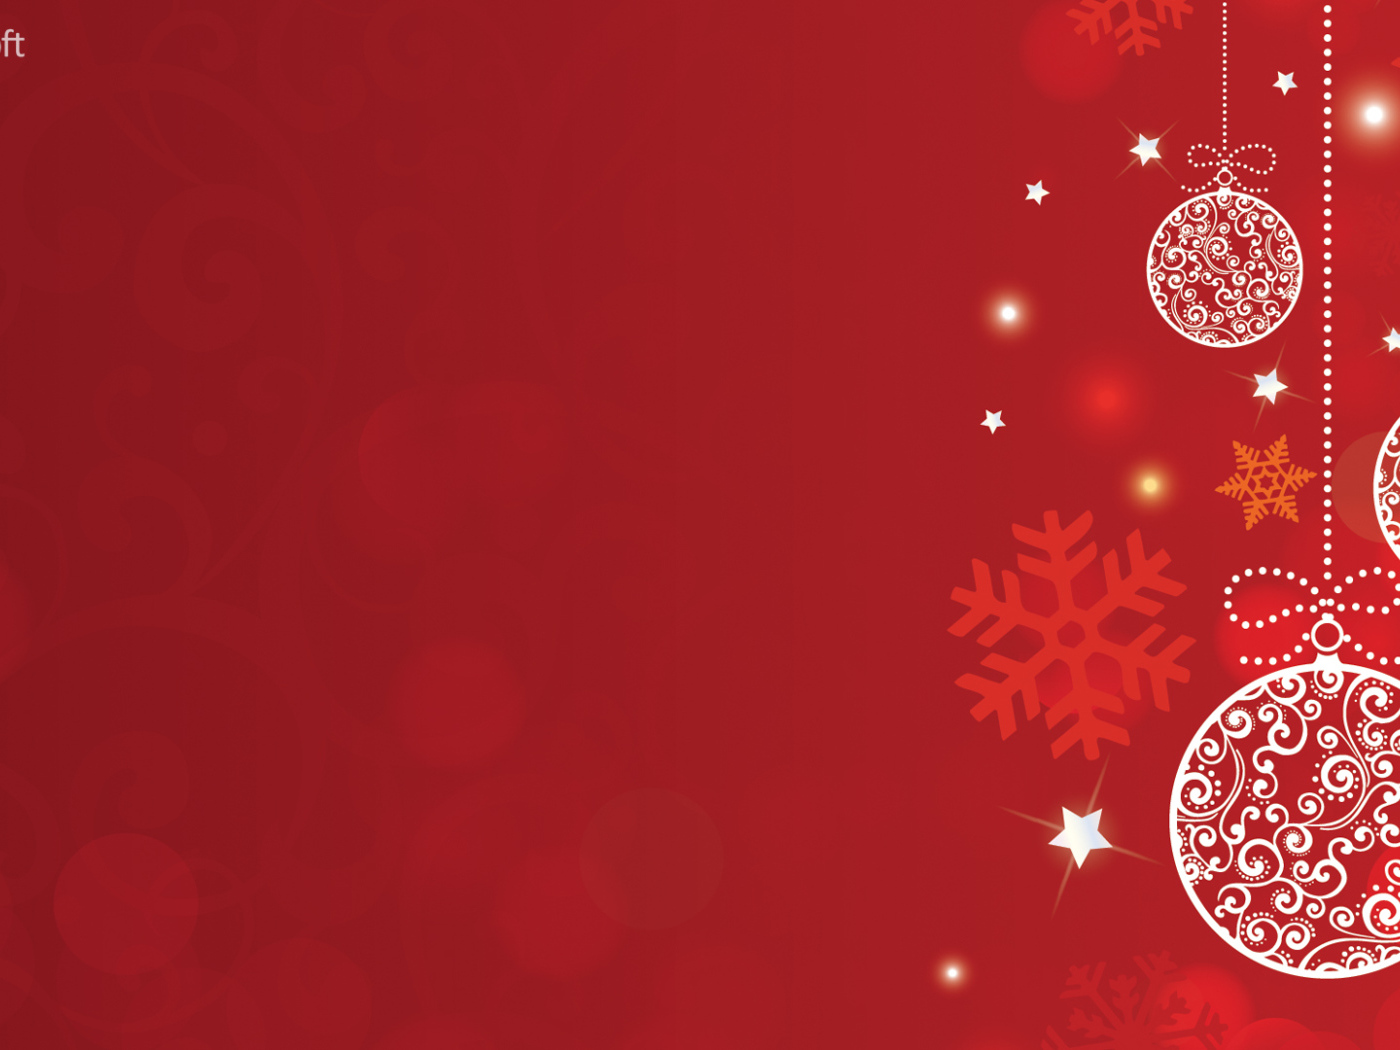 White Christmas decorations on a red background on Christmas